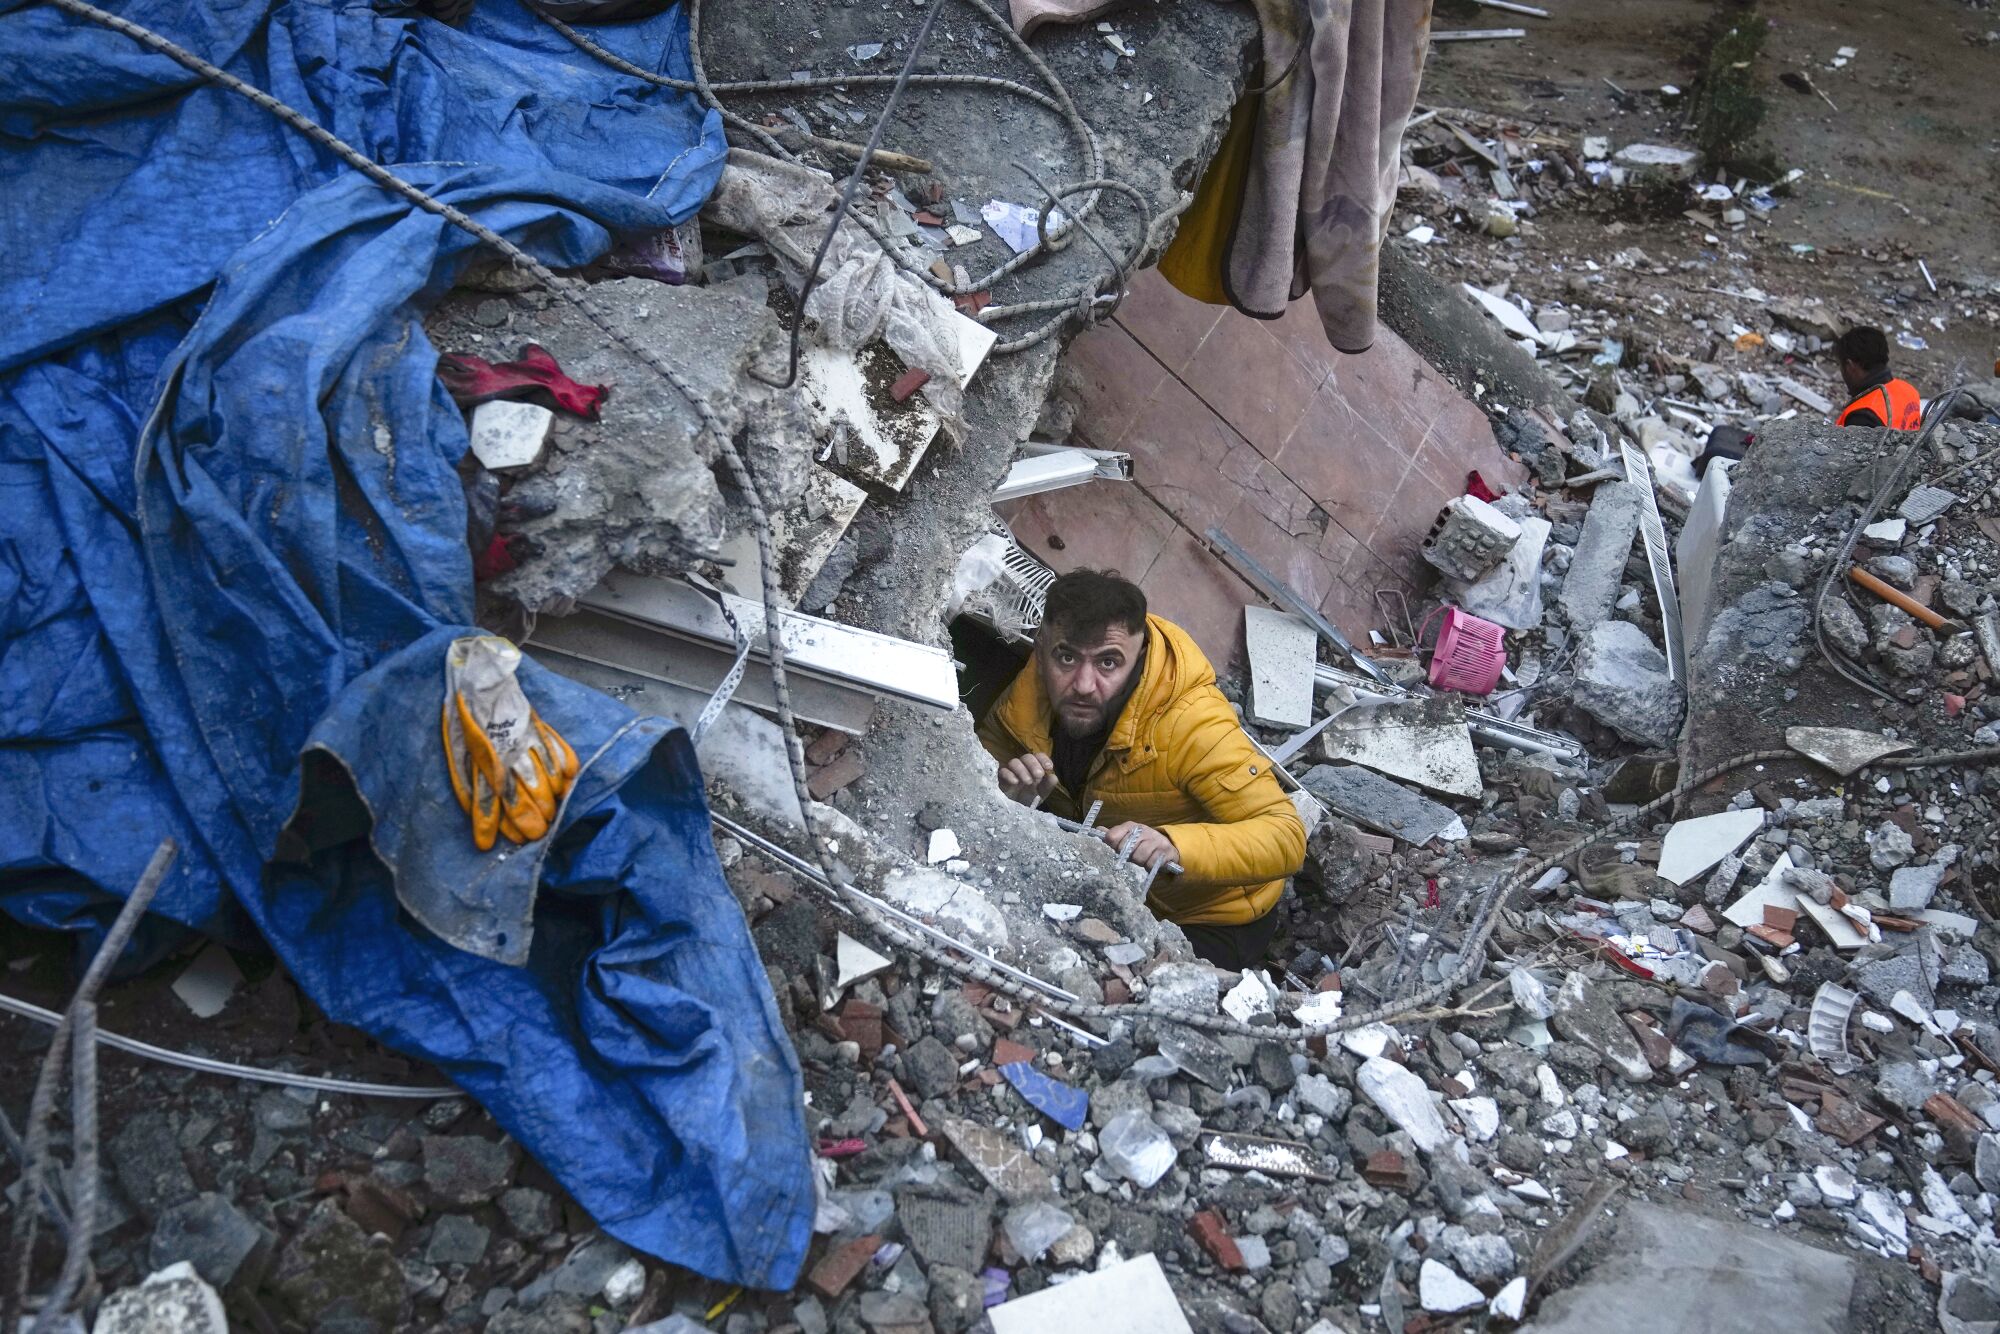 A man searches for people in a destroyed building Monday in Adana, Turkey.